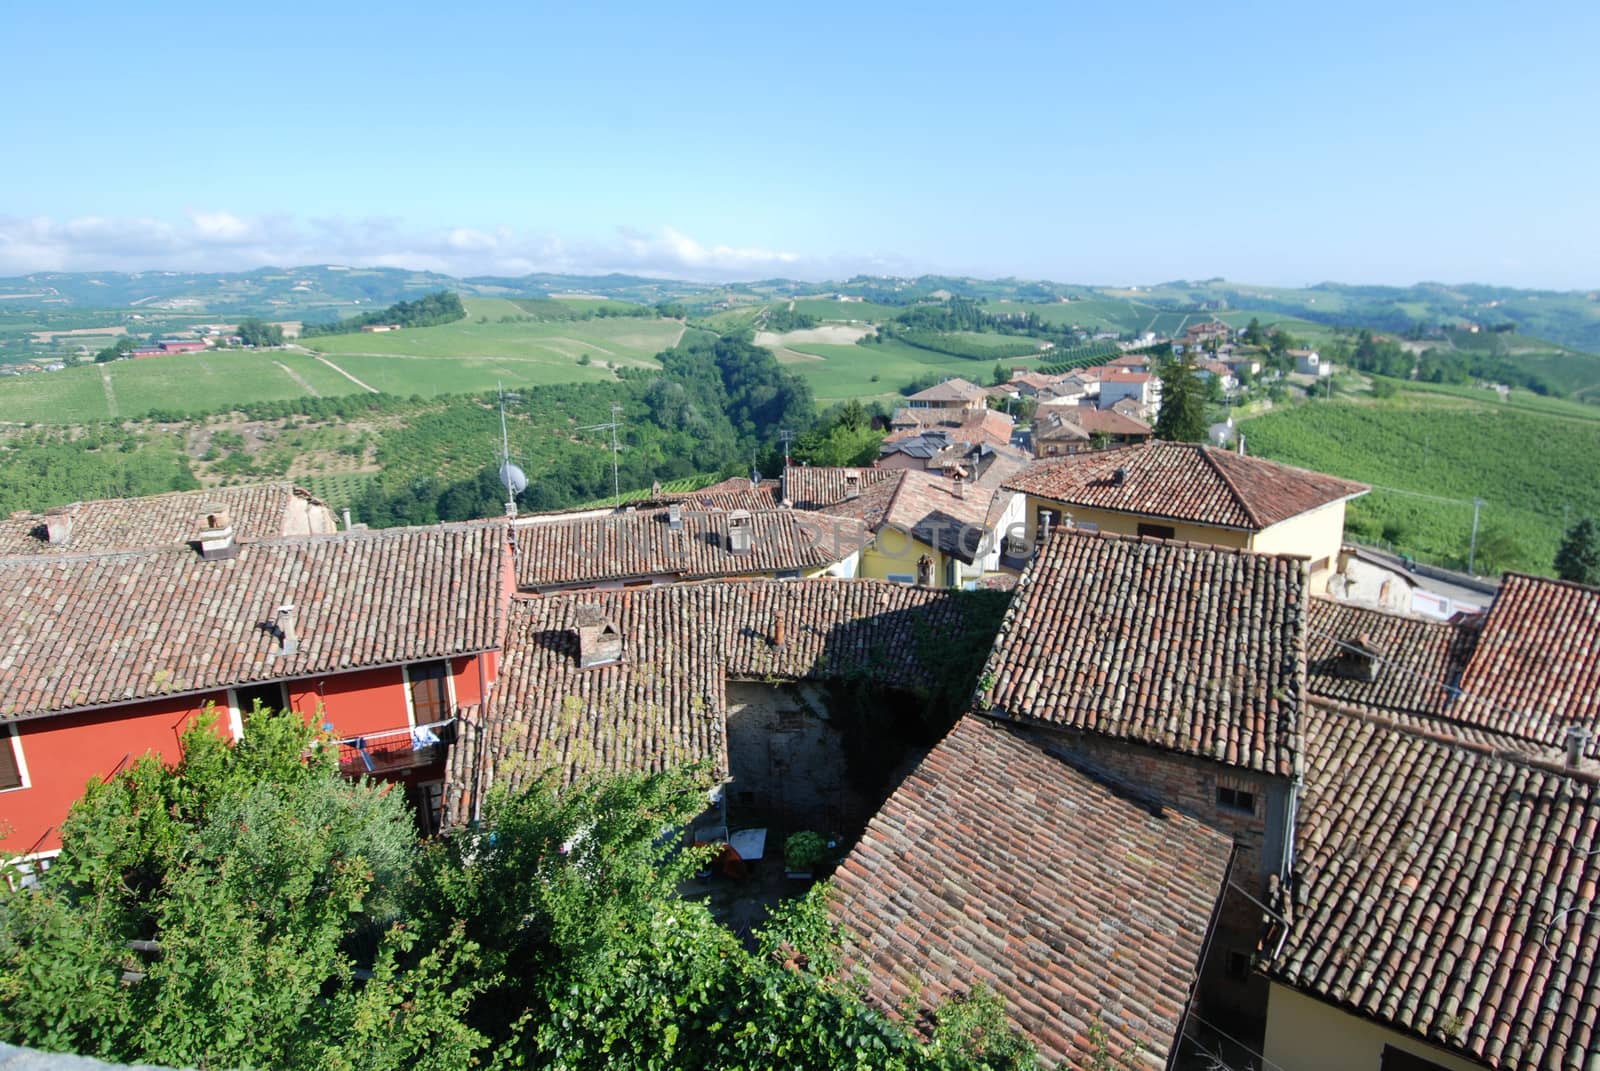 Overview of Serralunga d'Alba with roofs of houses, Piedmont - Italy